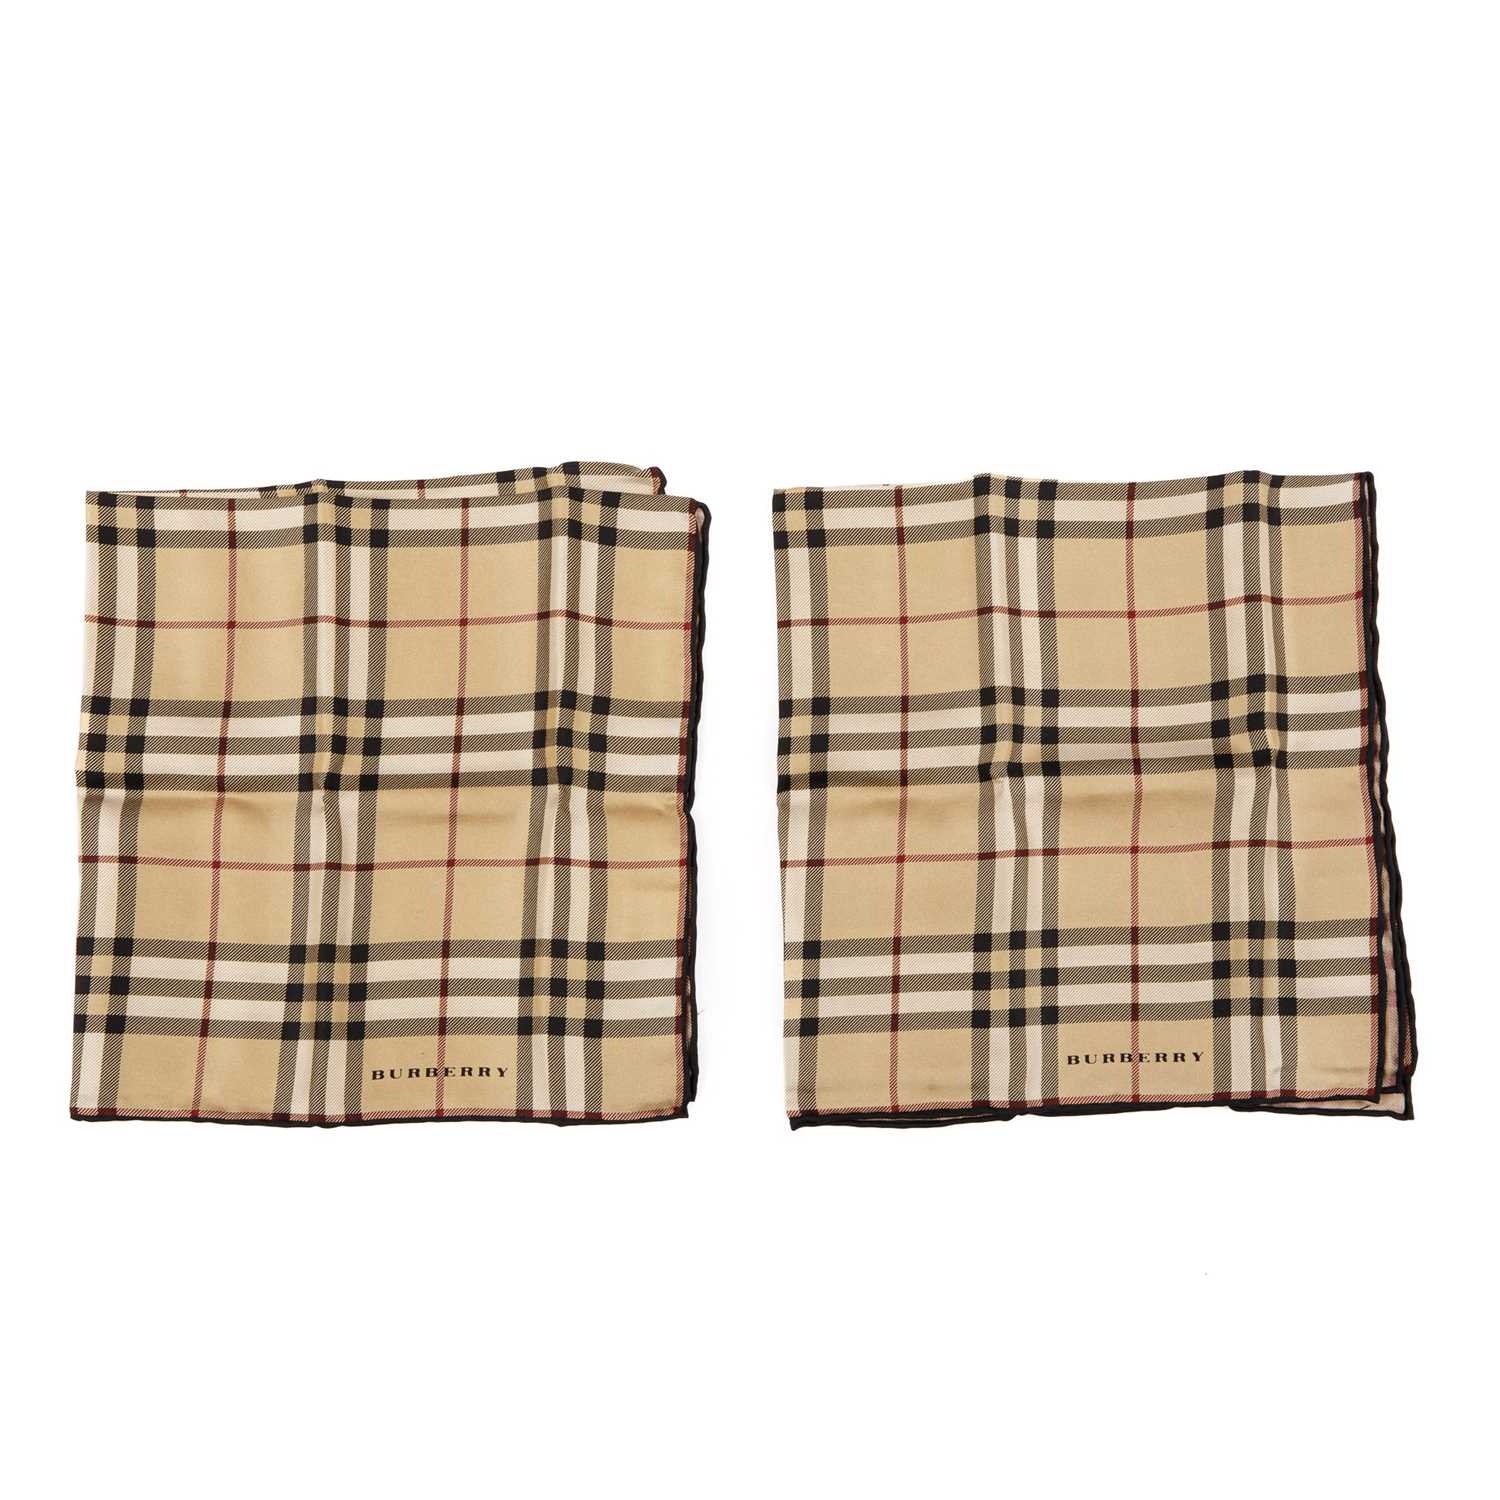 Burberry, two Nova Check silk handkerchiefs, with hand-rolled edges, measuring 47 by 47cm, with - Image 3 of 6